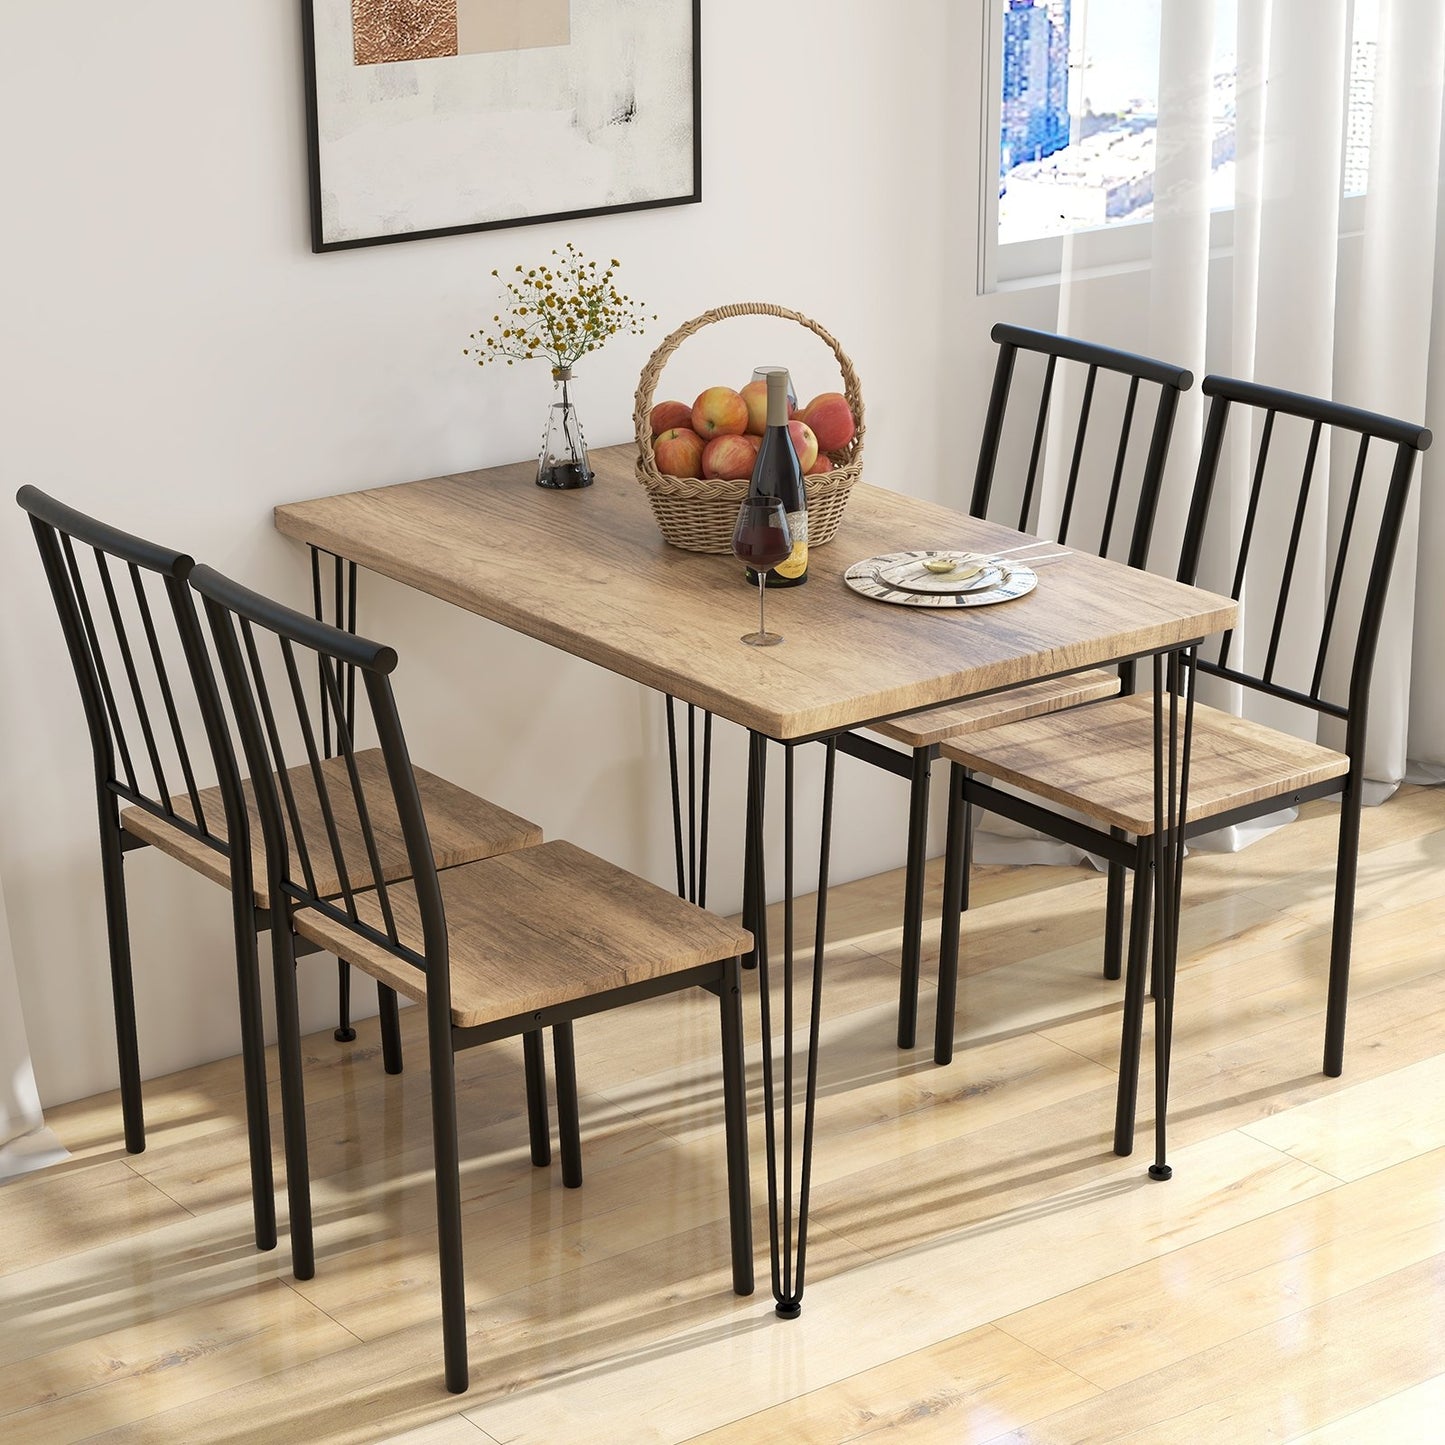 5 Pieces Dining Table Set for 4 with Metal Frame for Home Restaurant, Natural